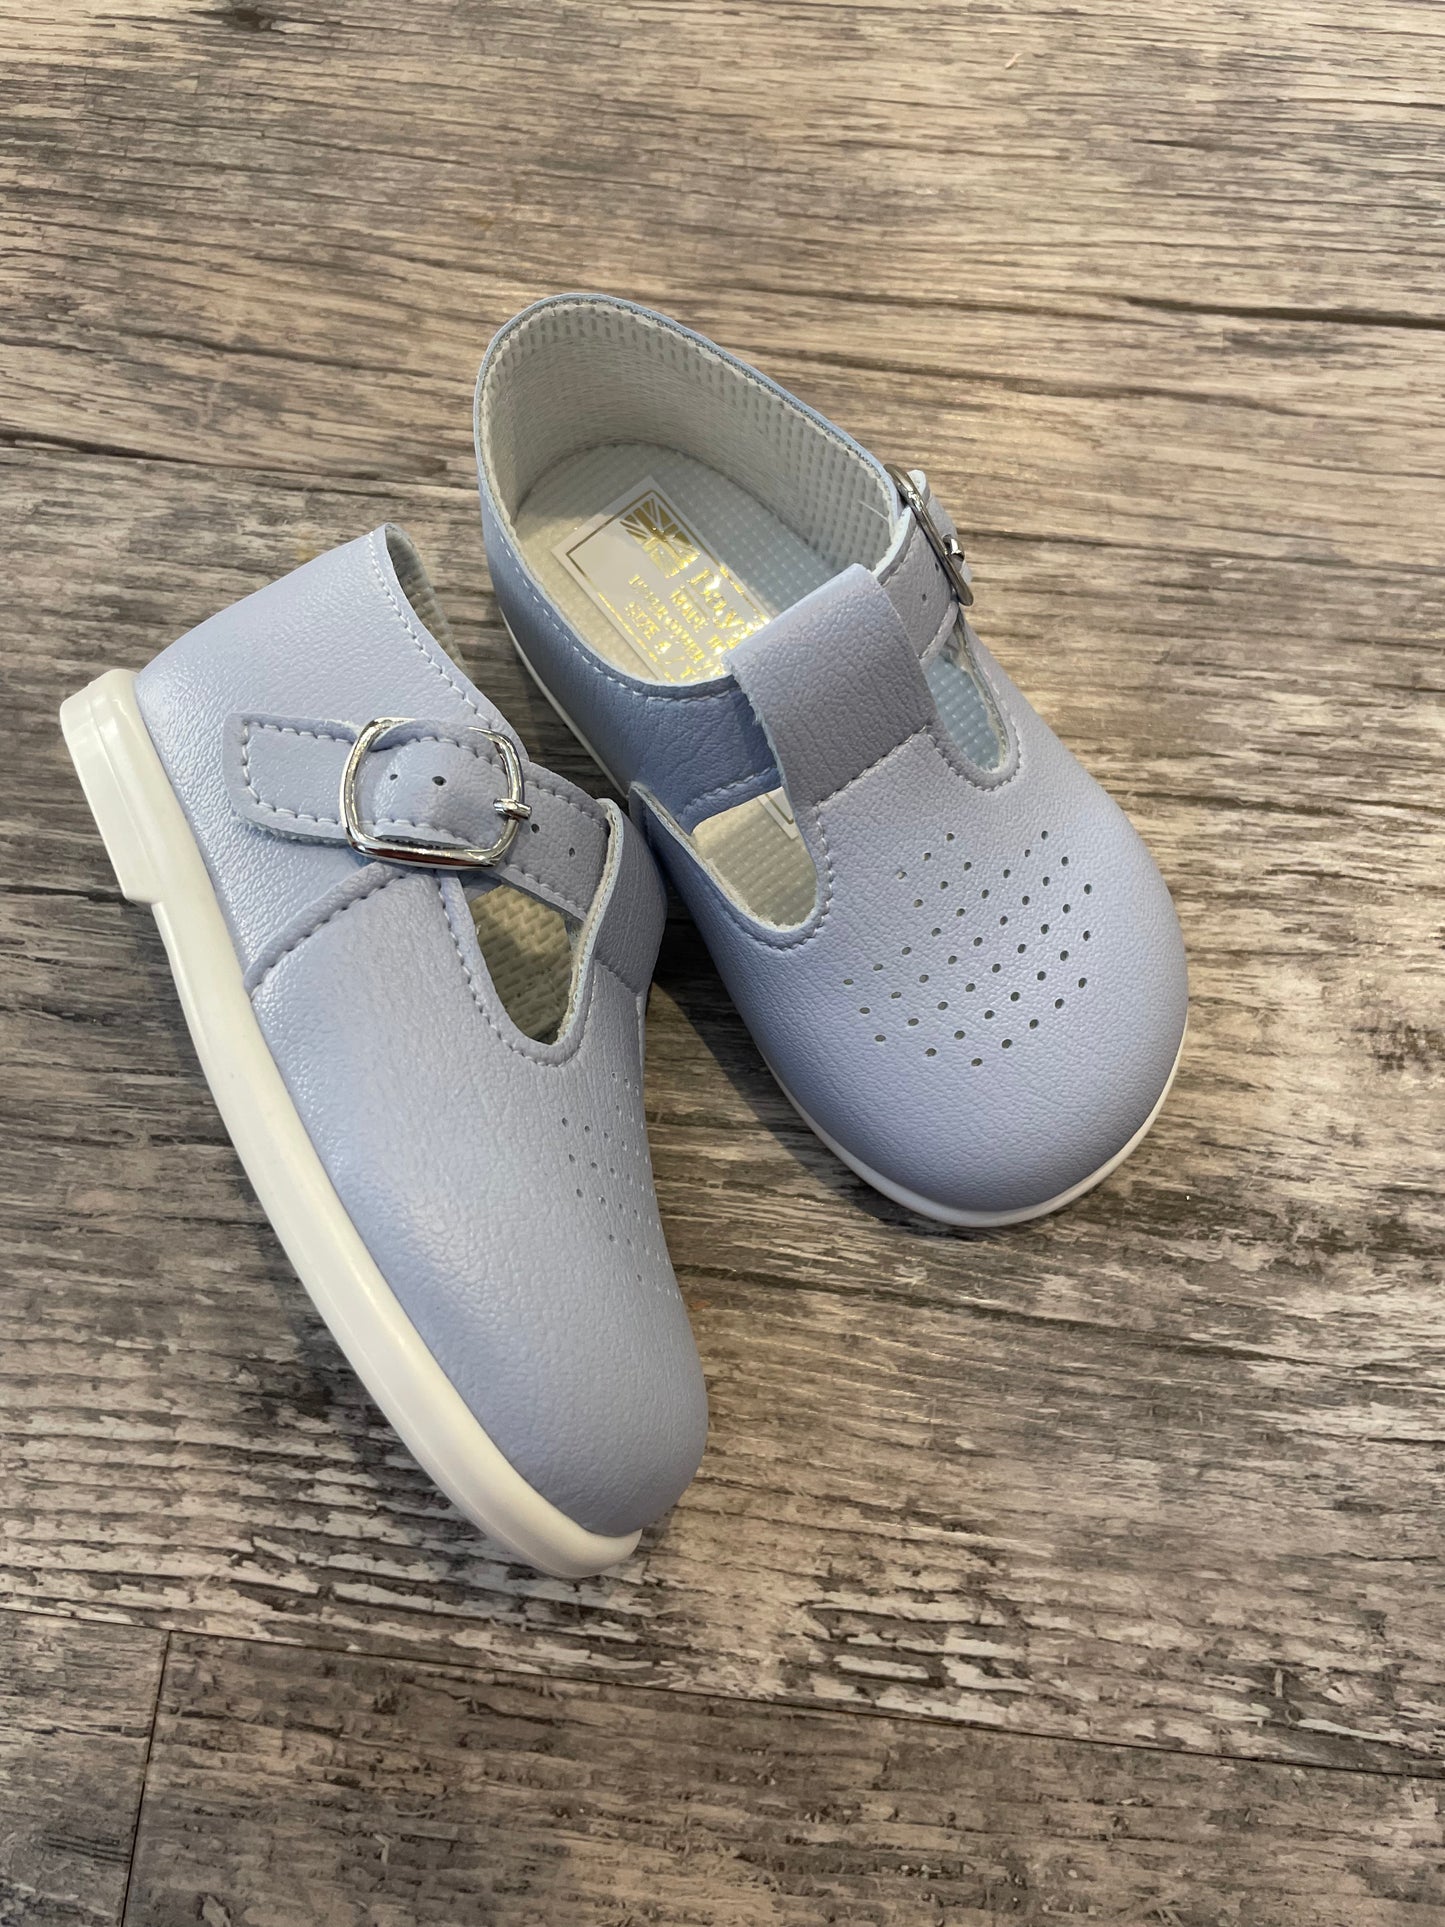 Baby blue hard sole shoes